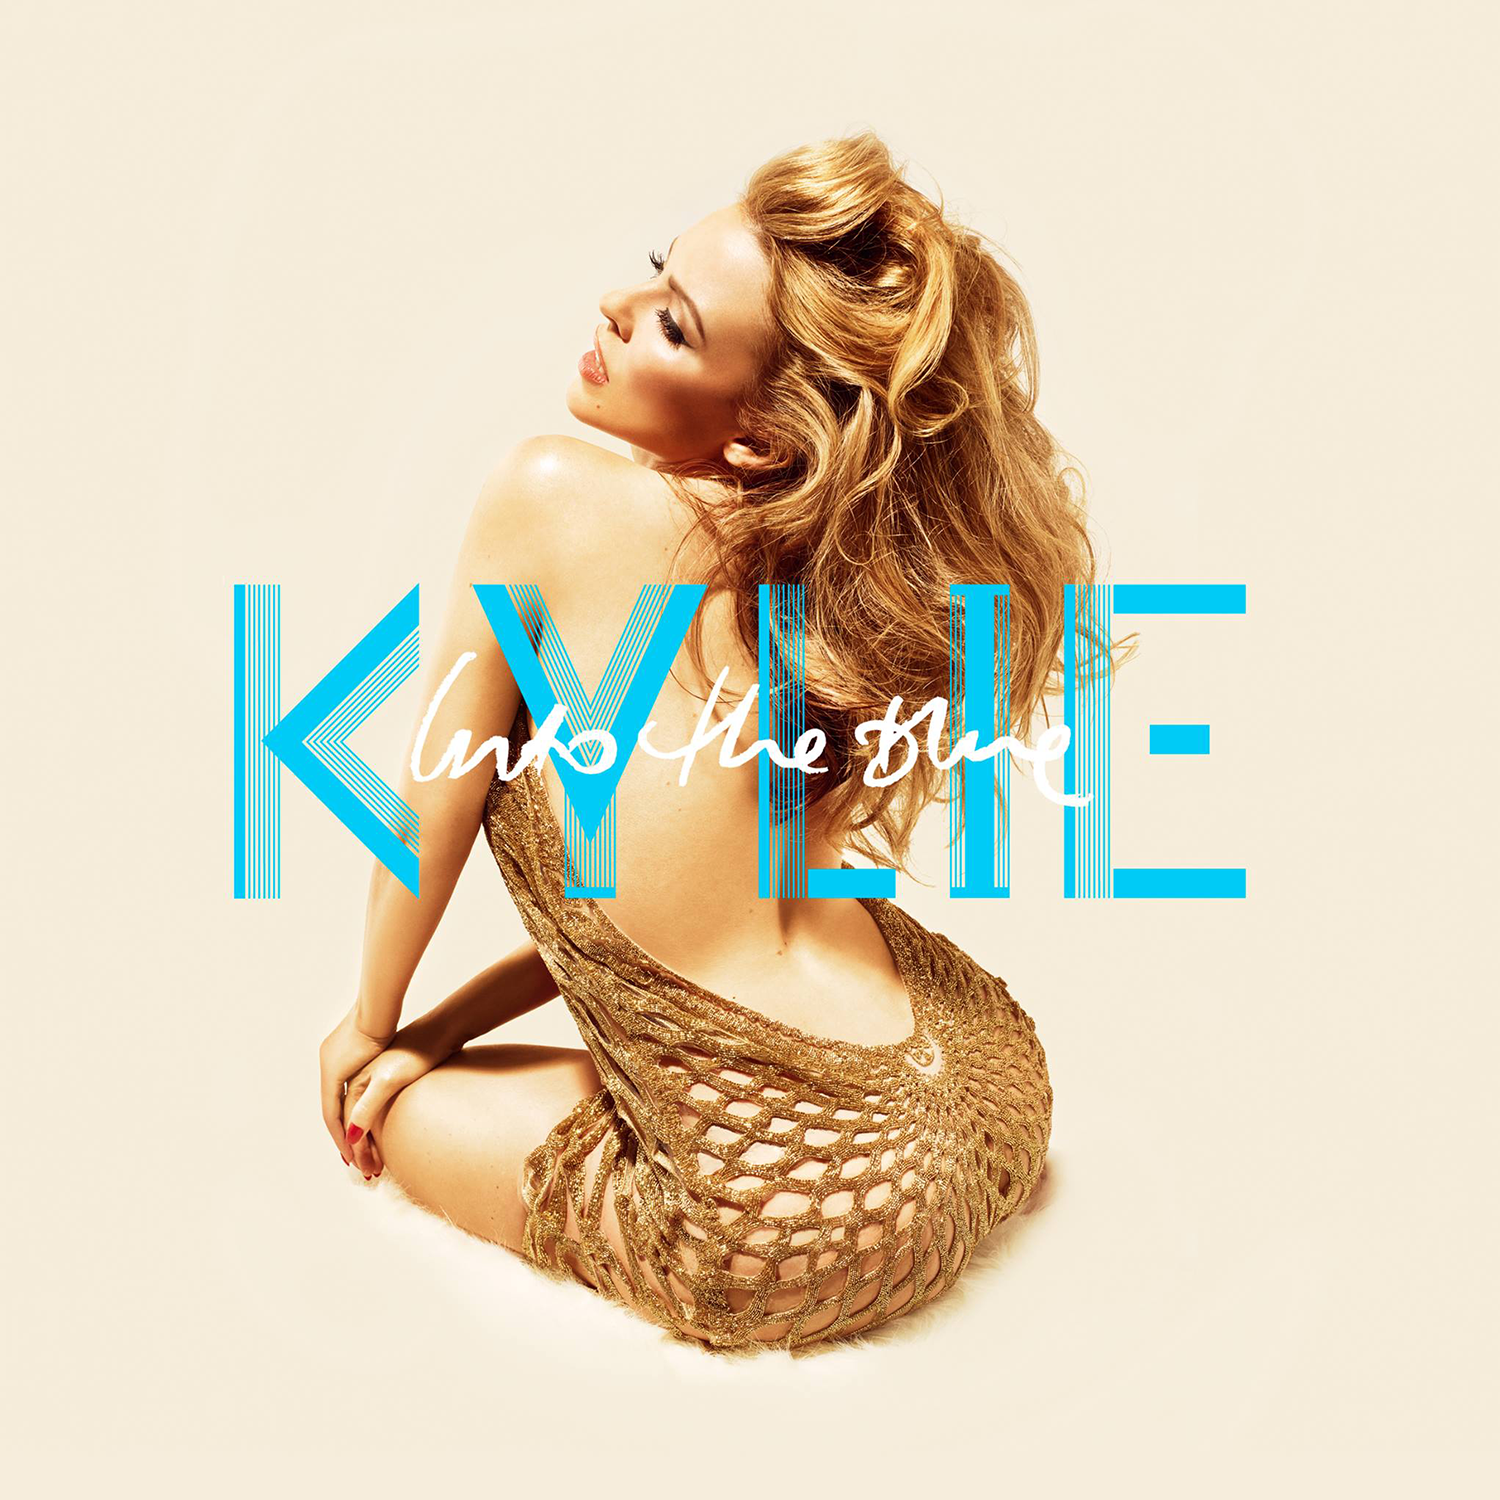 Kylie_Minogue_returns_with_new_album_and_single_release_details_into_The_Blue_song_track_taken_from_Kiss_Me_Once_studio_LP_music_scene_ireland.png